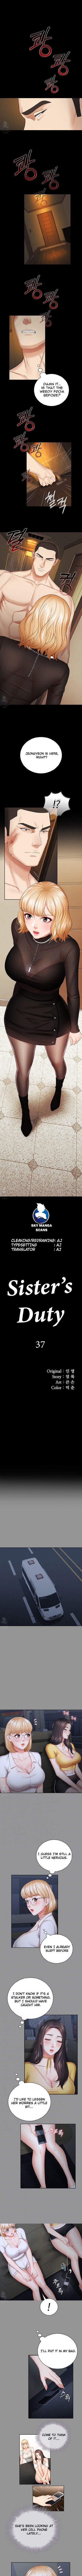 My Sister’s Duty Chapter 37 - Page 1